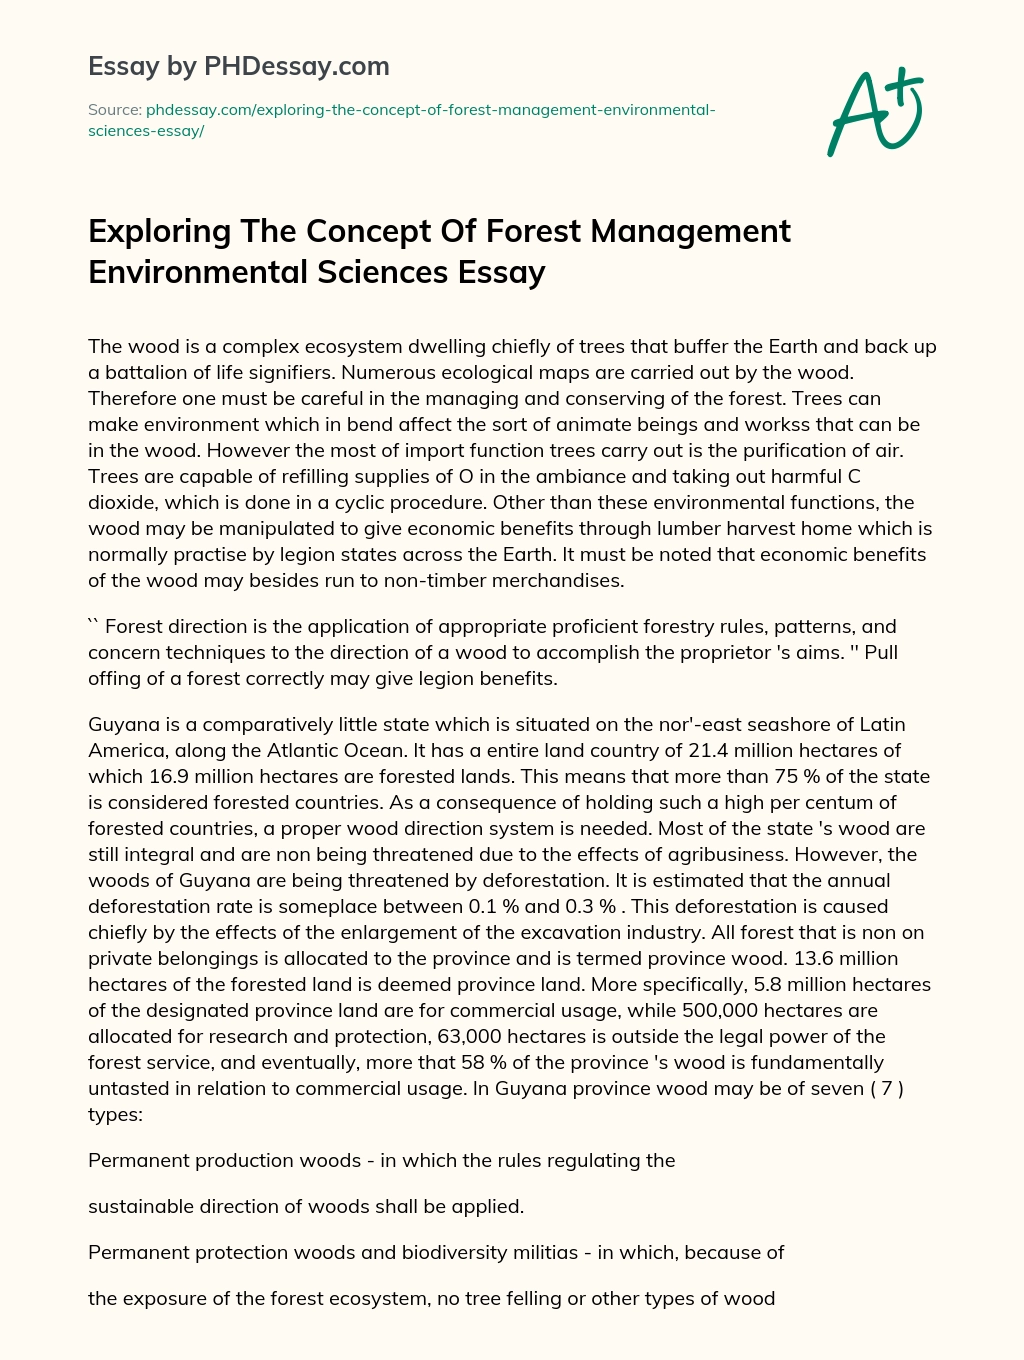 Exploring The Concept Of Forest Management Environmental Sciences Essay essay